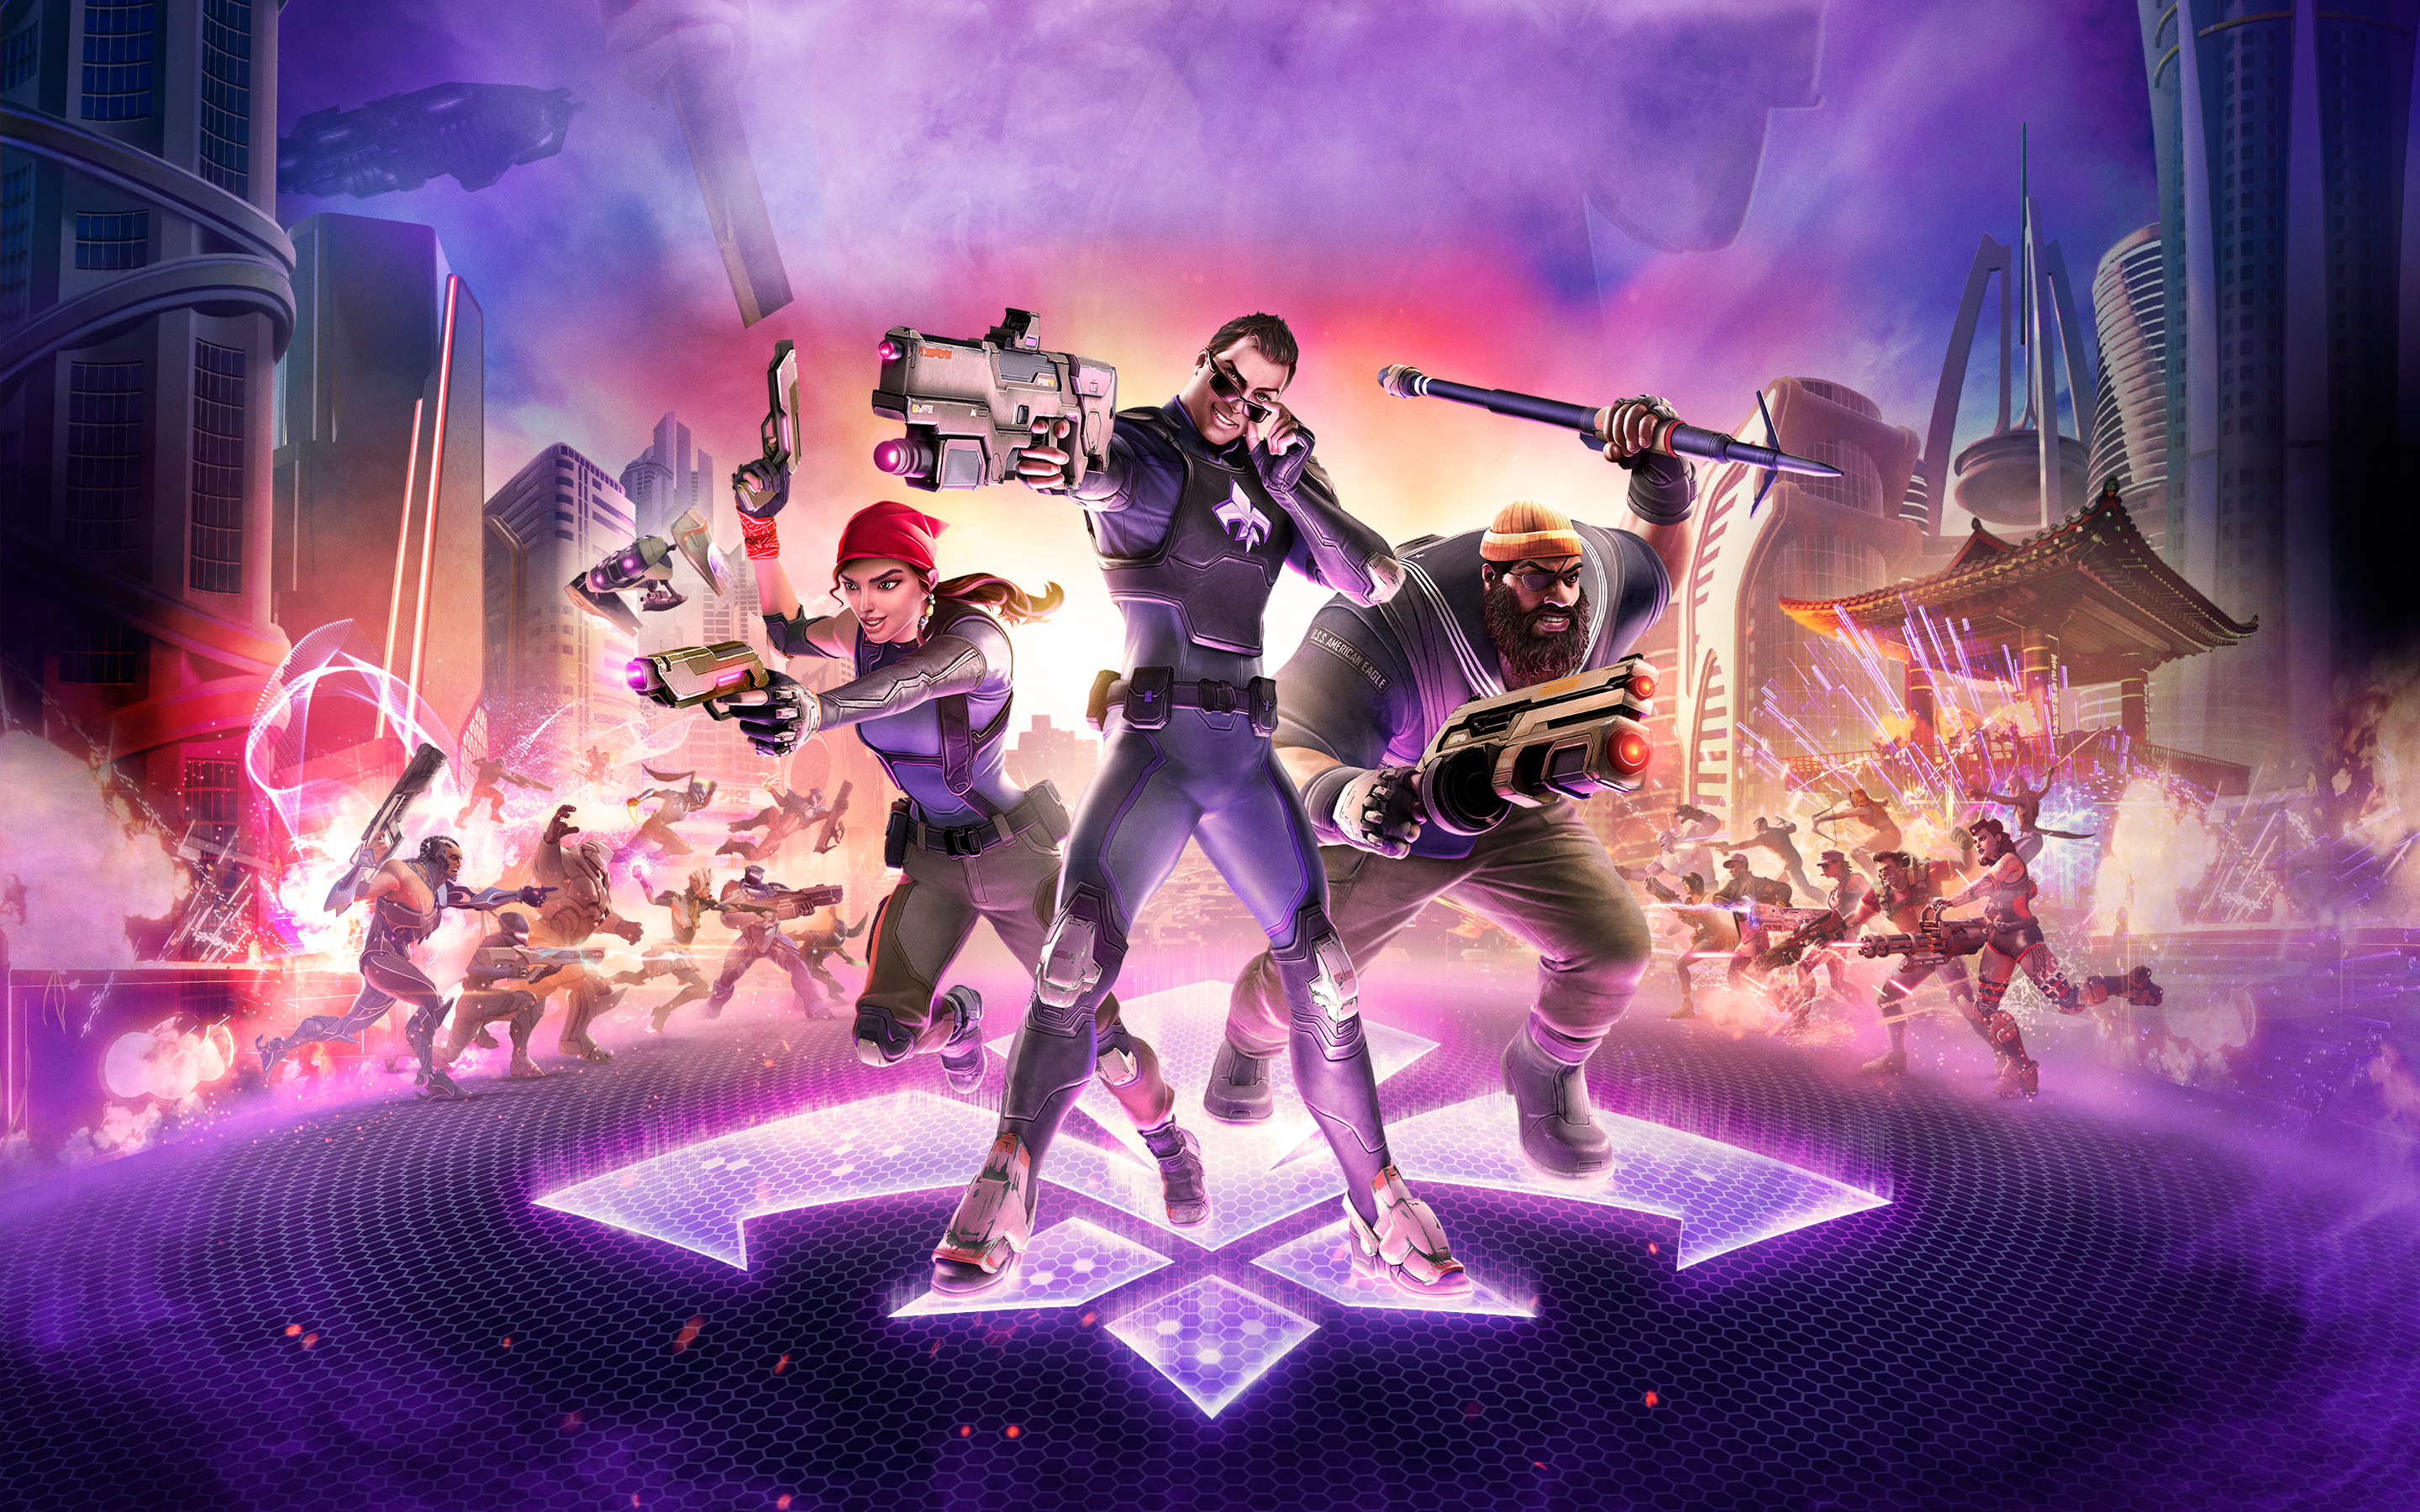 Video Game Agents of Mayhem HD Wallpaper | Background Image